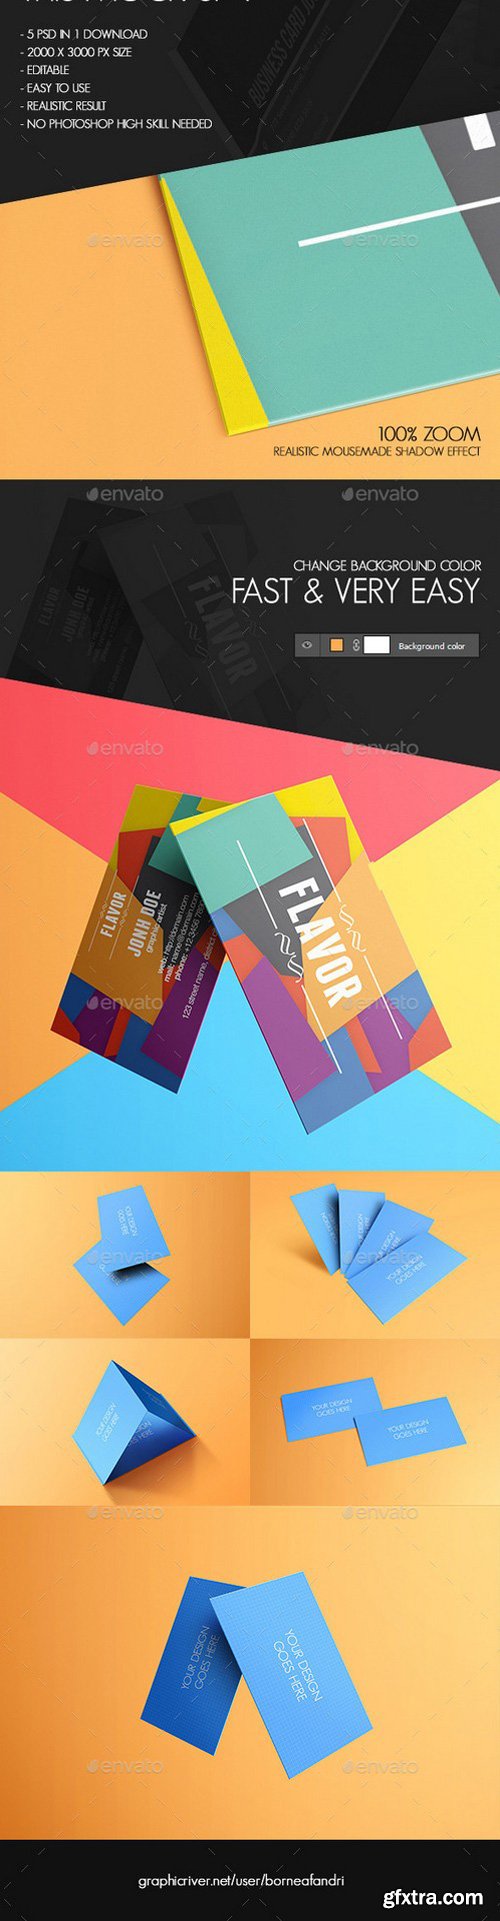 GraphicRiver - 11799947 Realistic Business Card Mock-Up